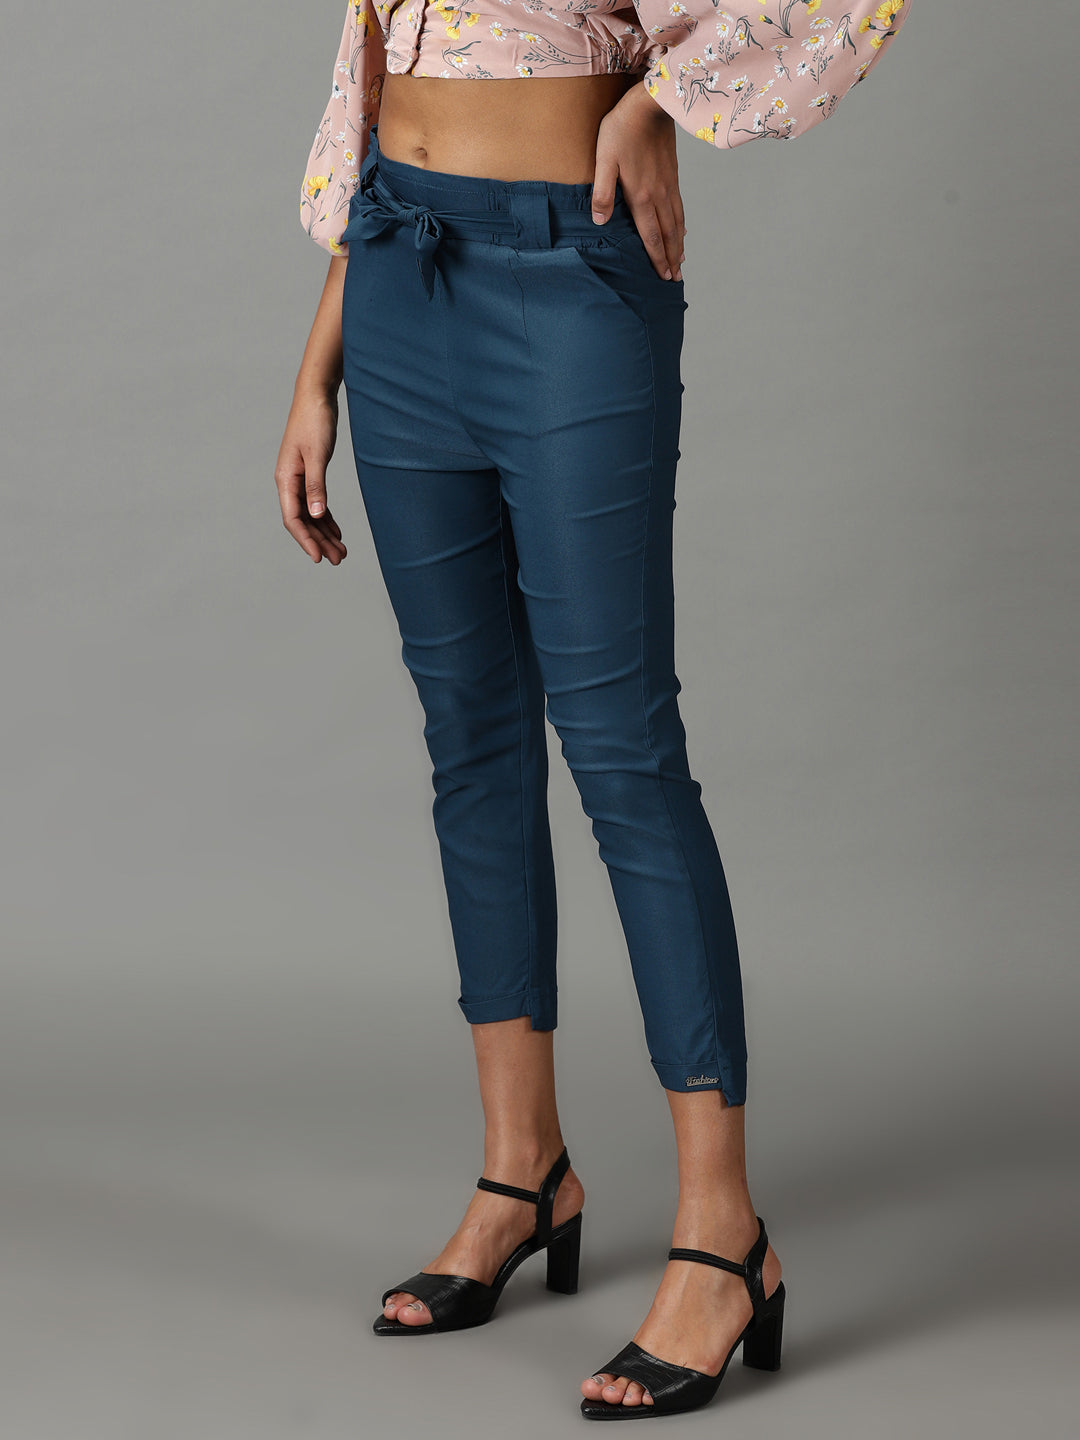 Women's Teal Solid Trouser